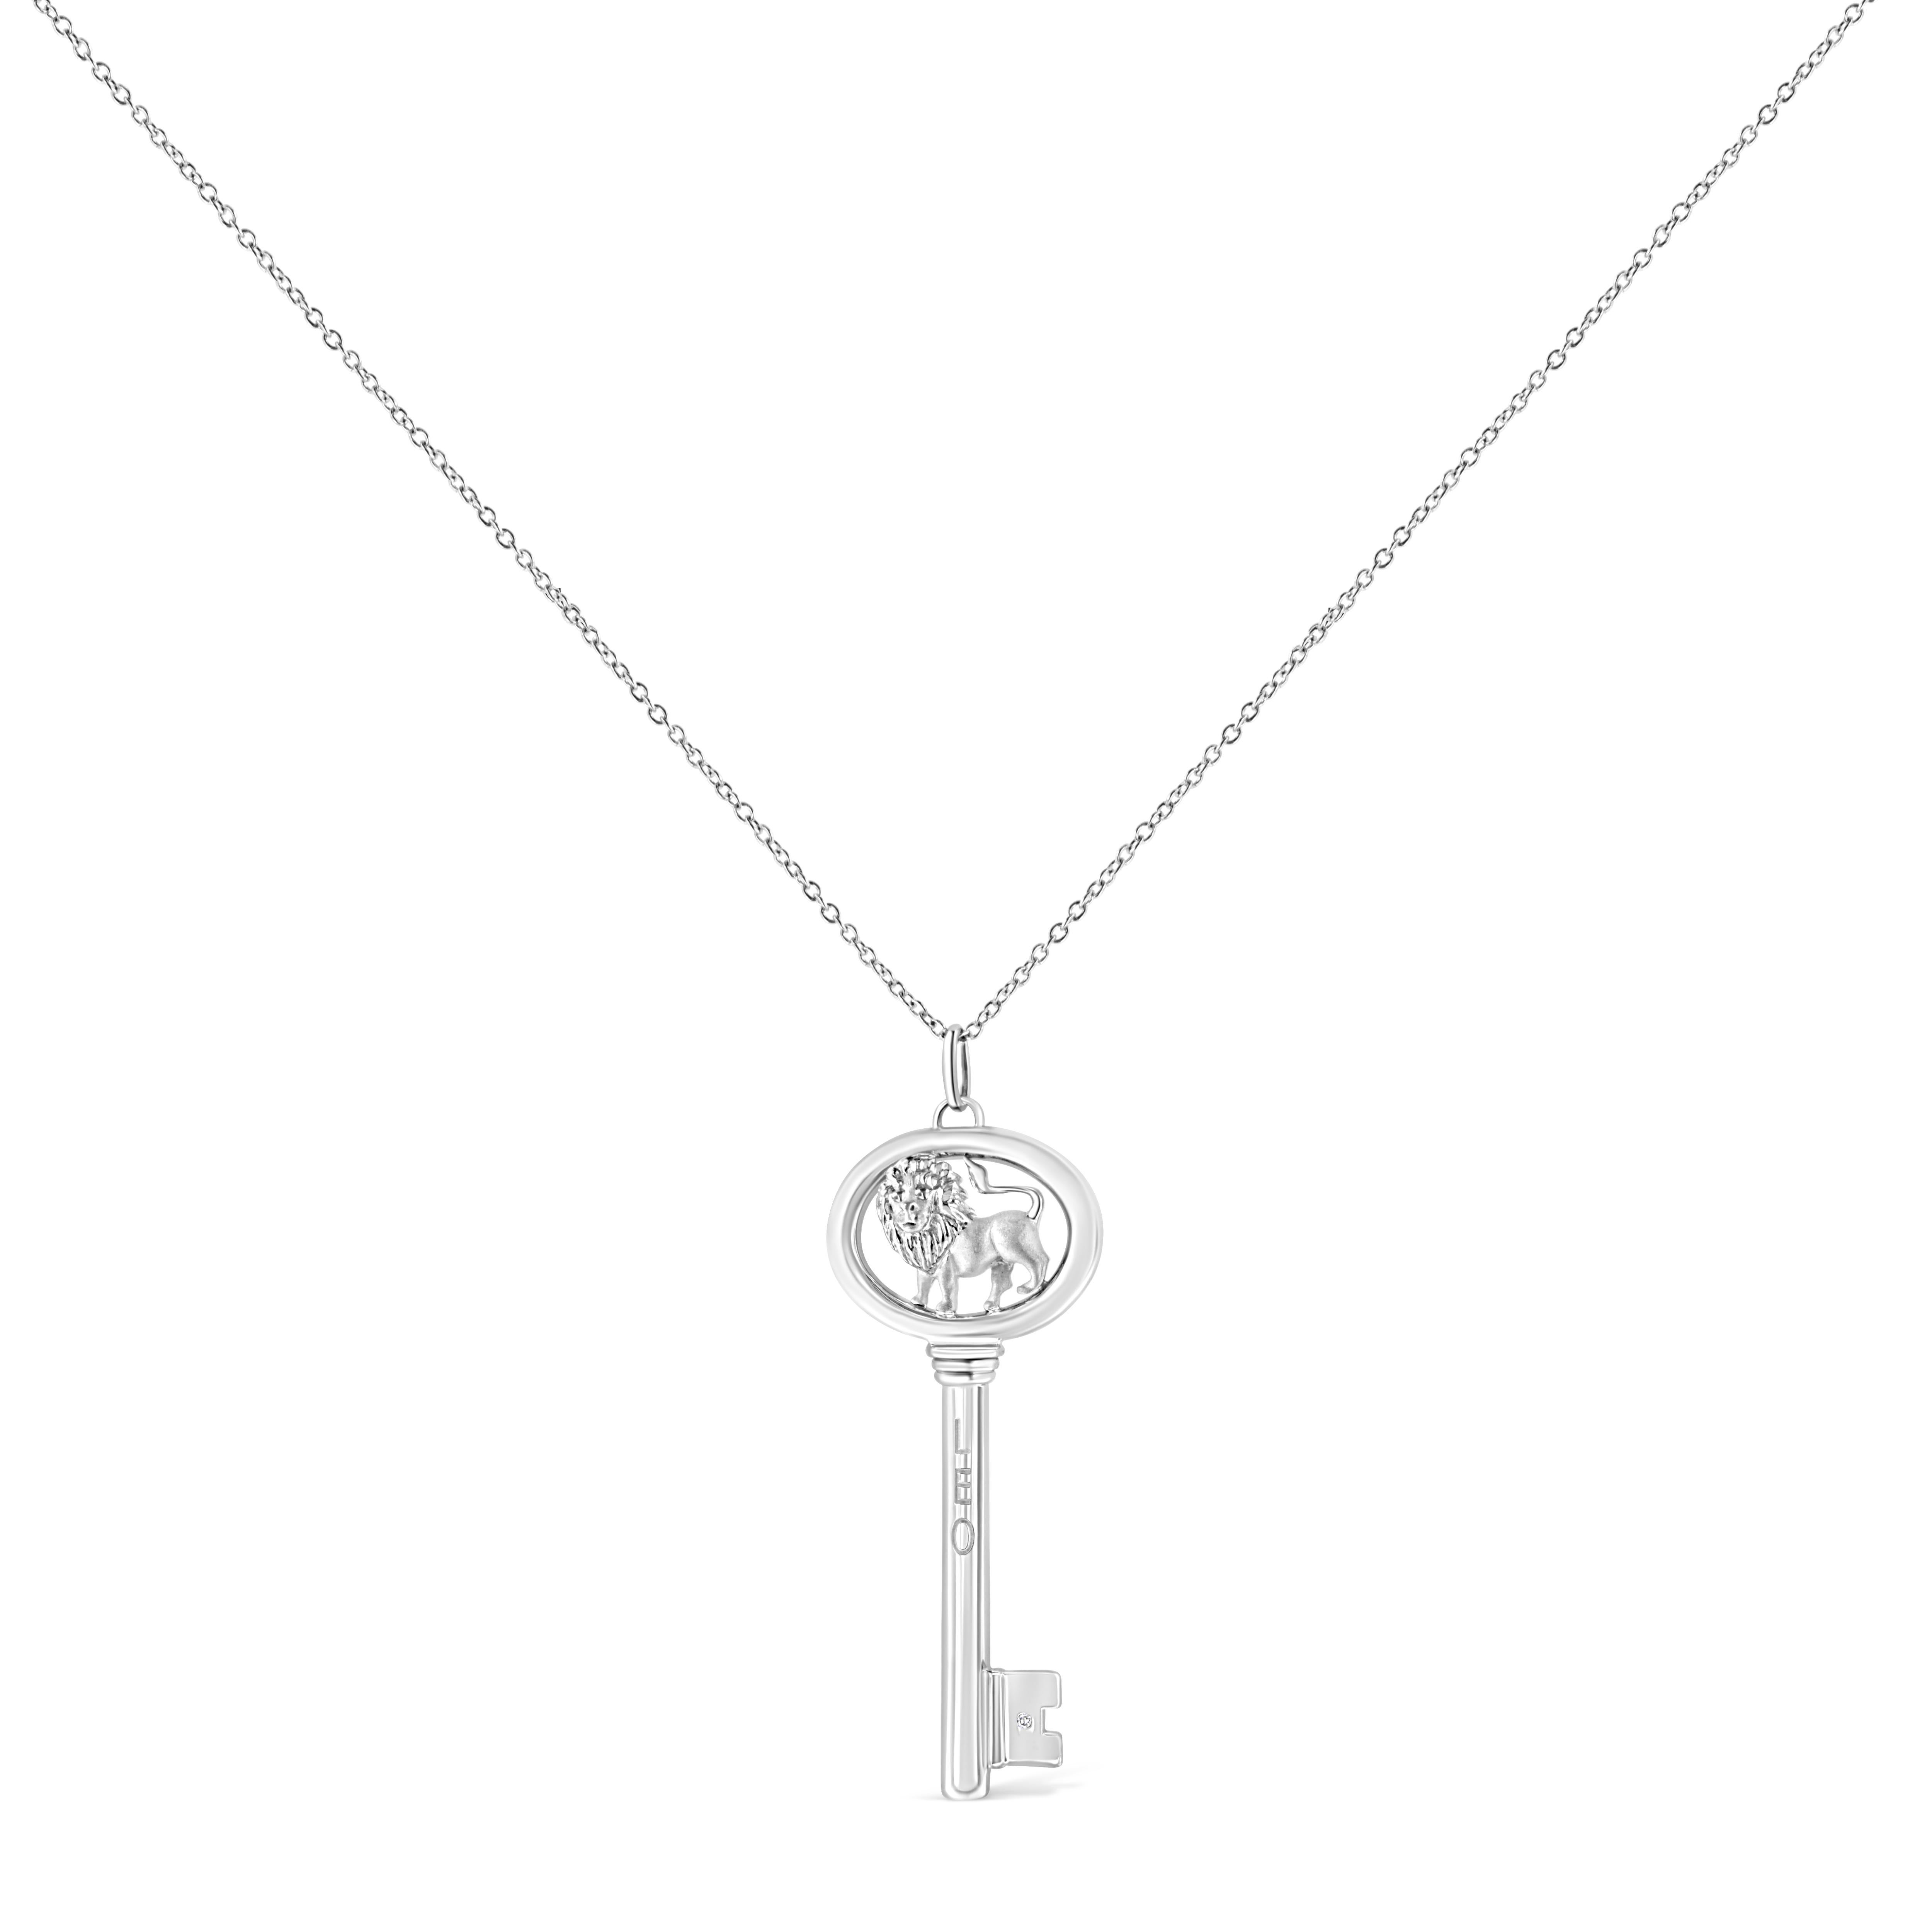 It's as if the stars aligned to create this stunning .925 Sterling Silver necklace flaunting a Leo zodiac pendant accented by a glimmering bezel set natural diamond. Brilliant beacons of optimism and hope, our Zodiac Keys are radiant symbols of a